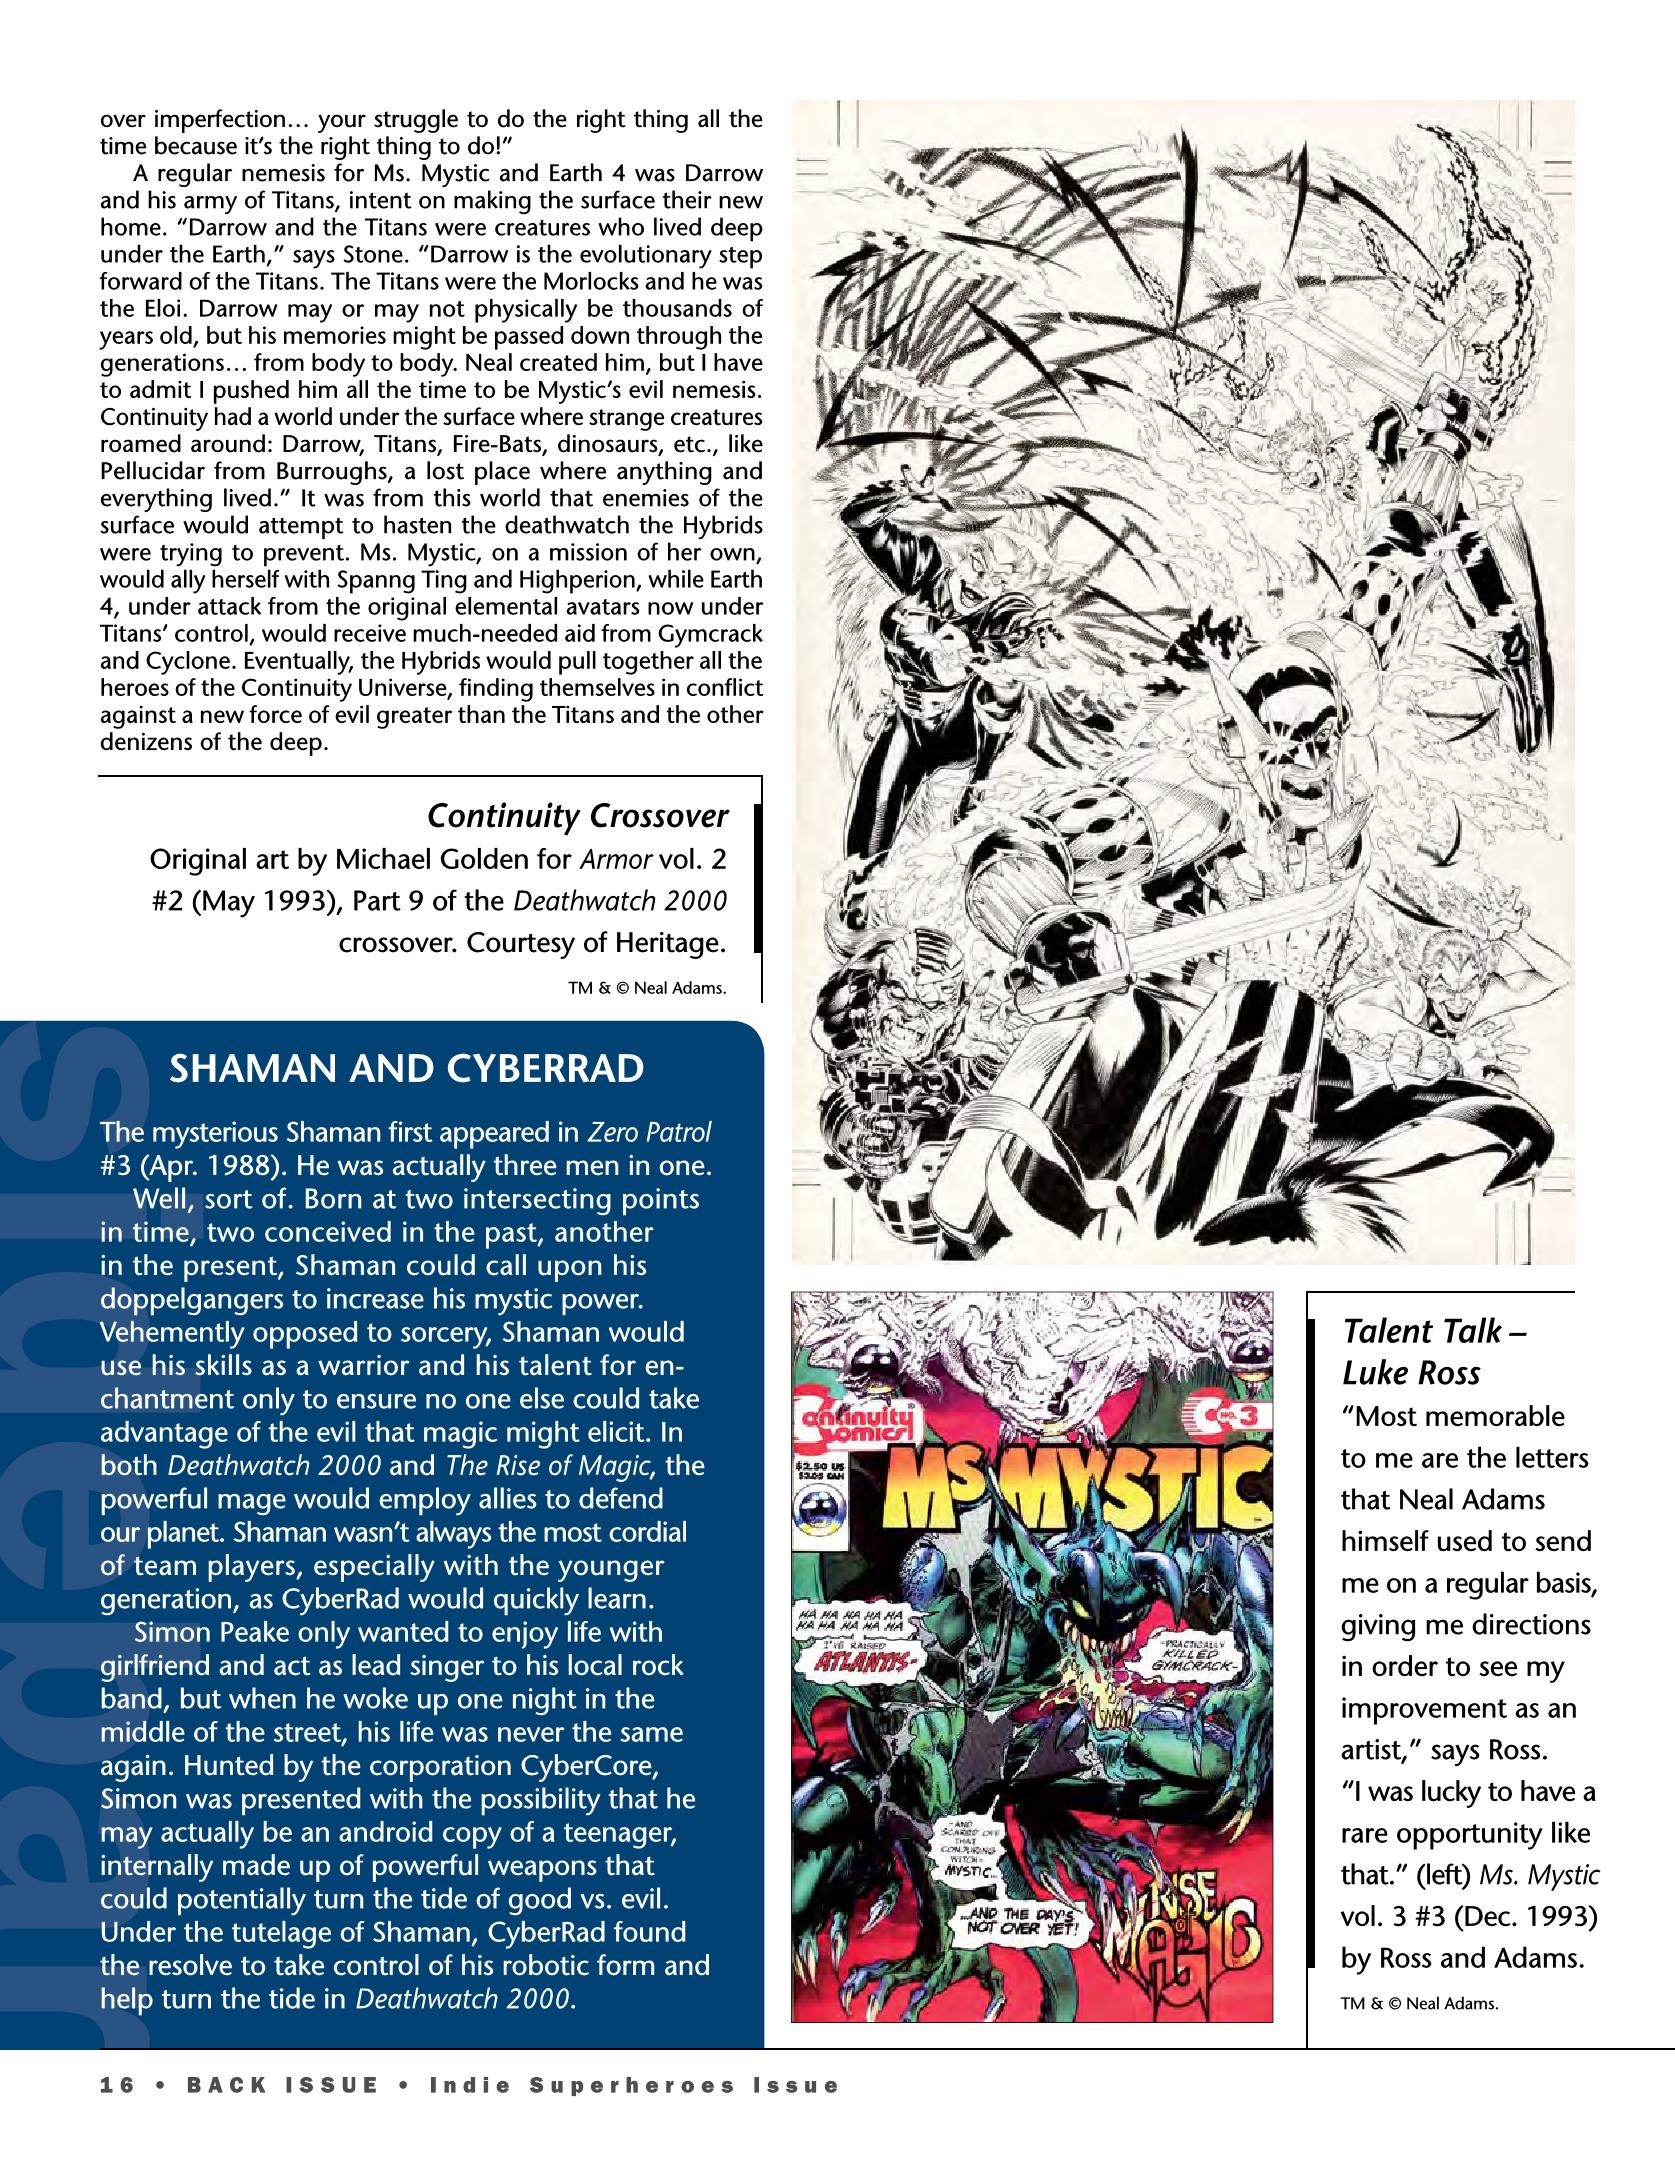 Read online Back Issue comic -  Issue #94 - 10